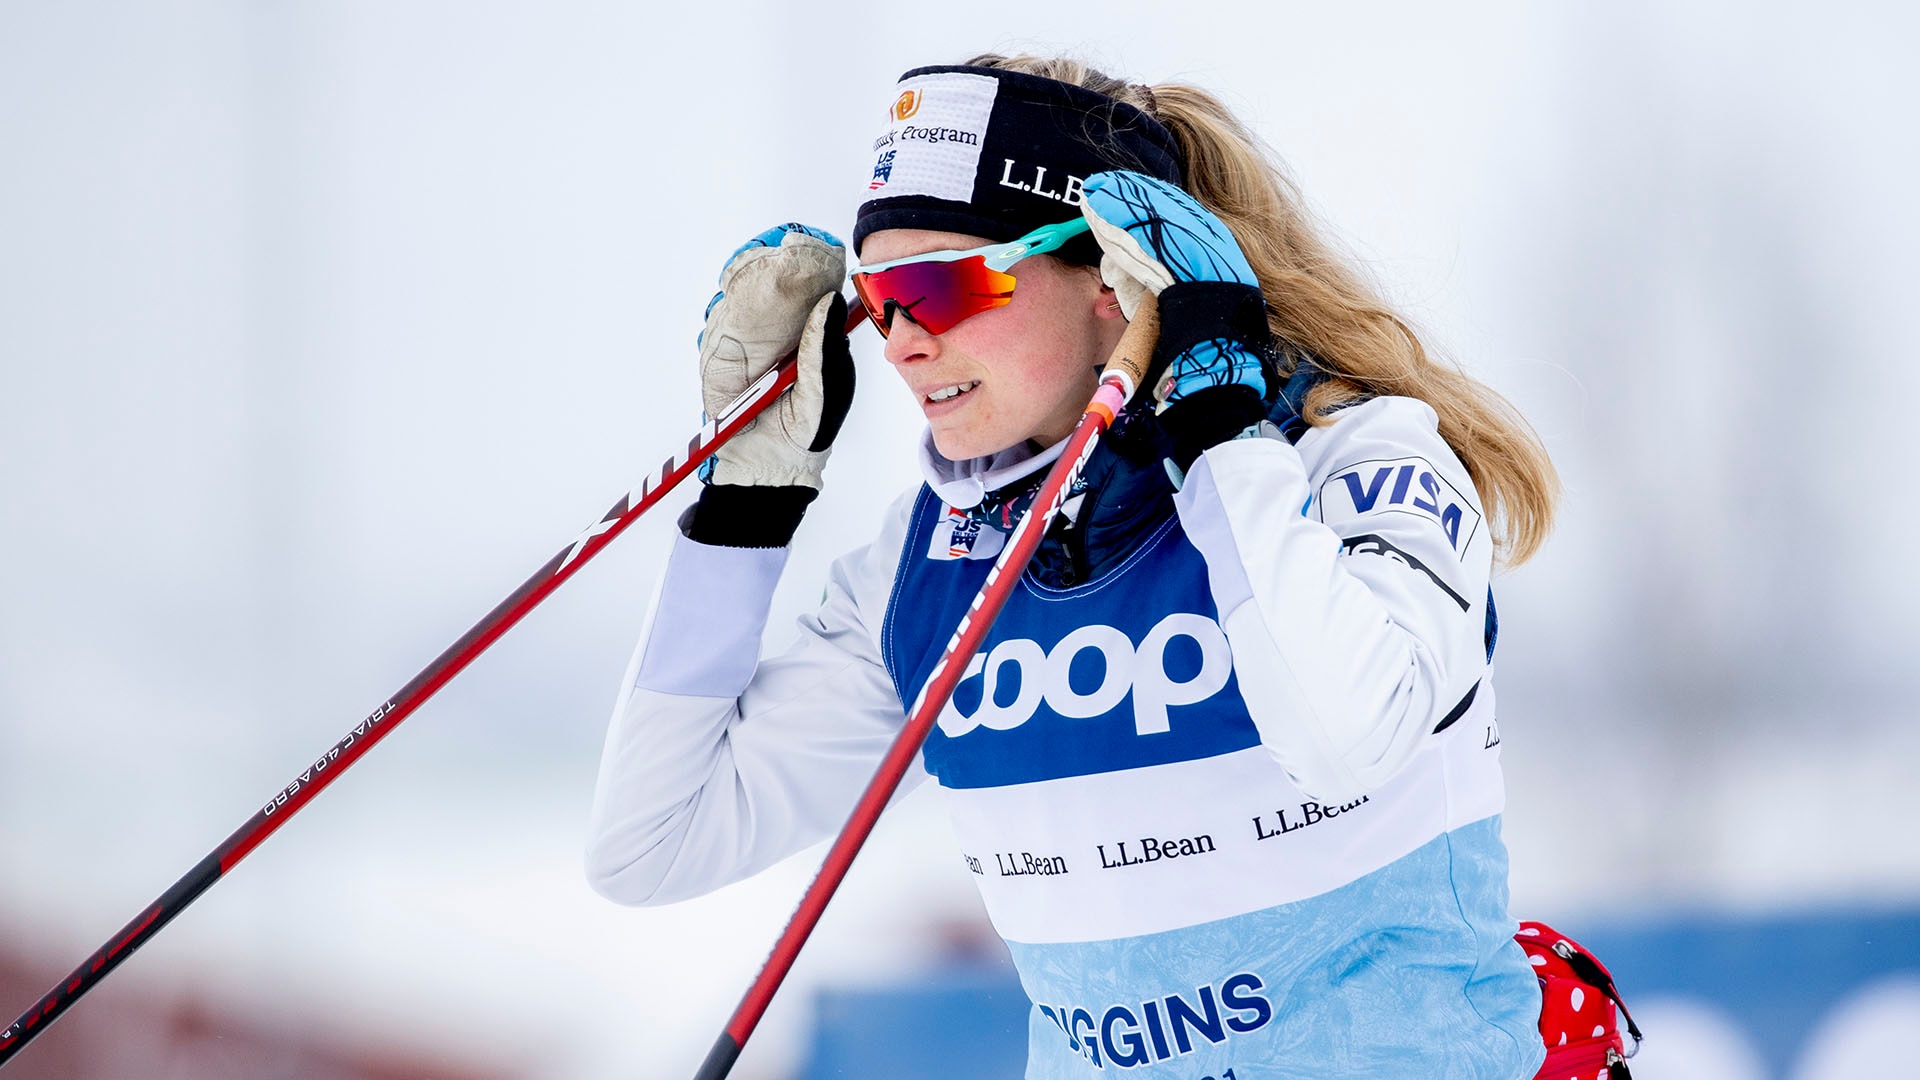 How to watch Jessie Diggins at the 2022 Winter Olympics on NBC and Peacock